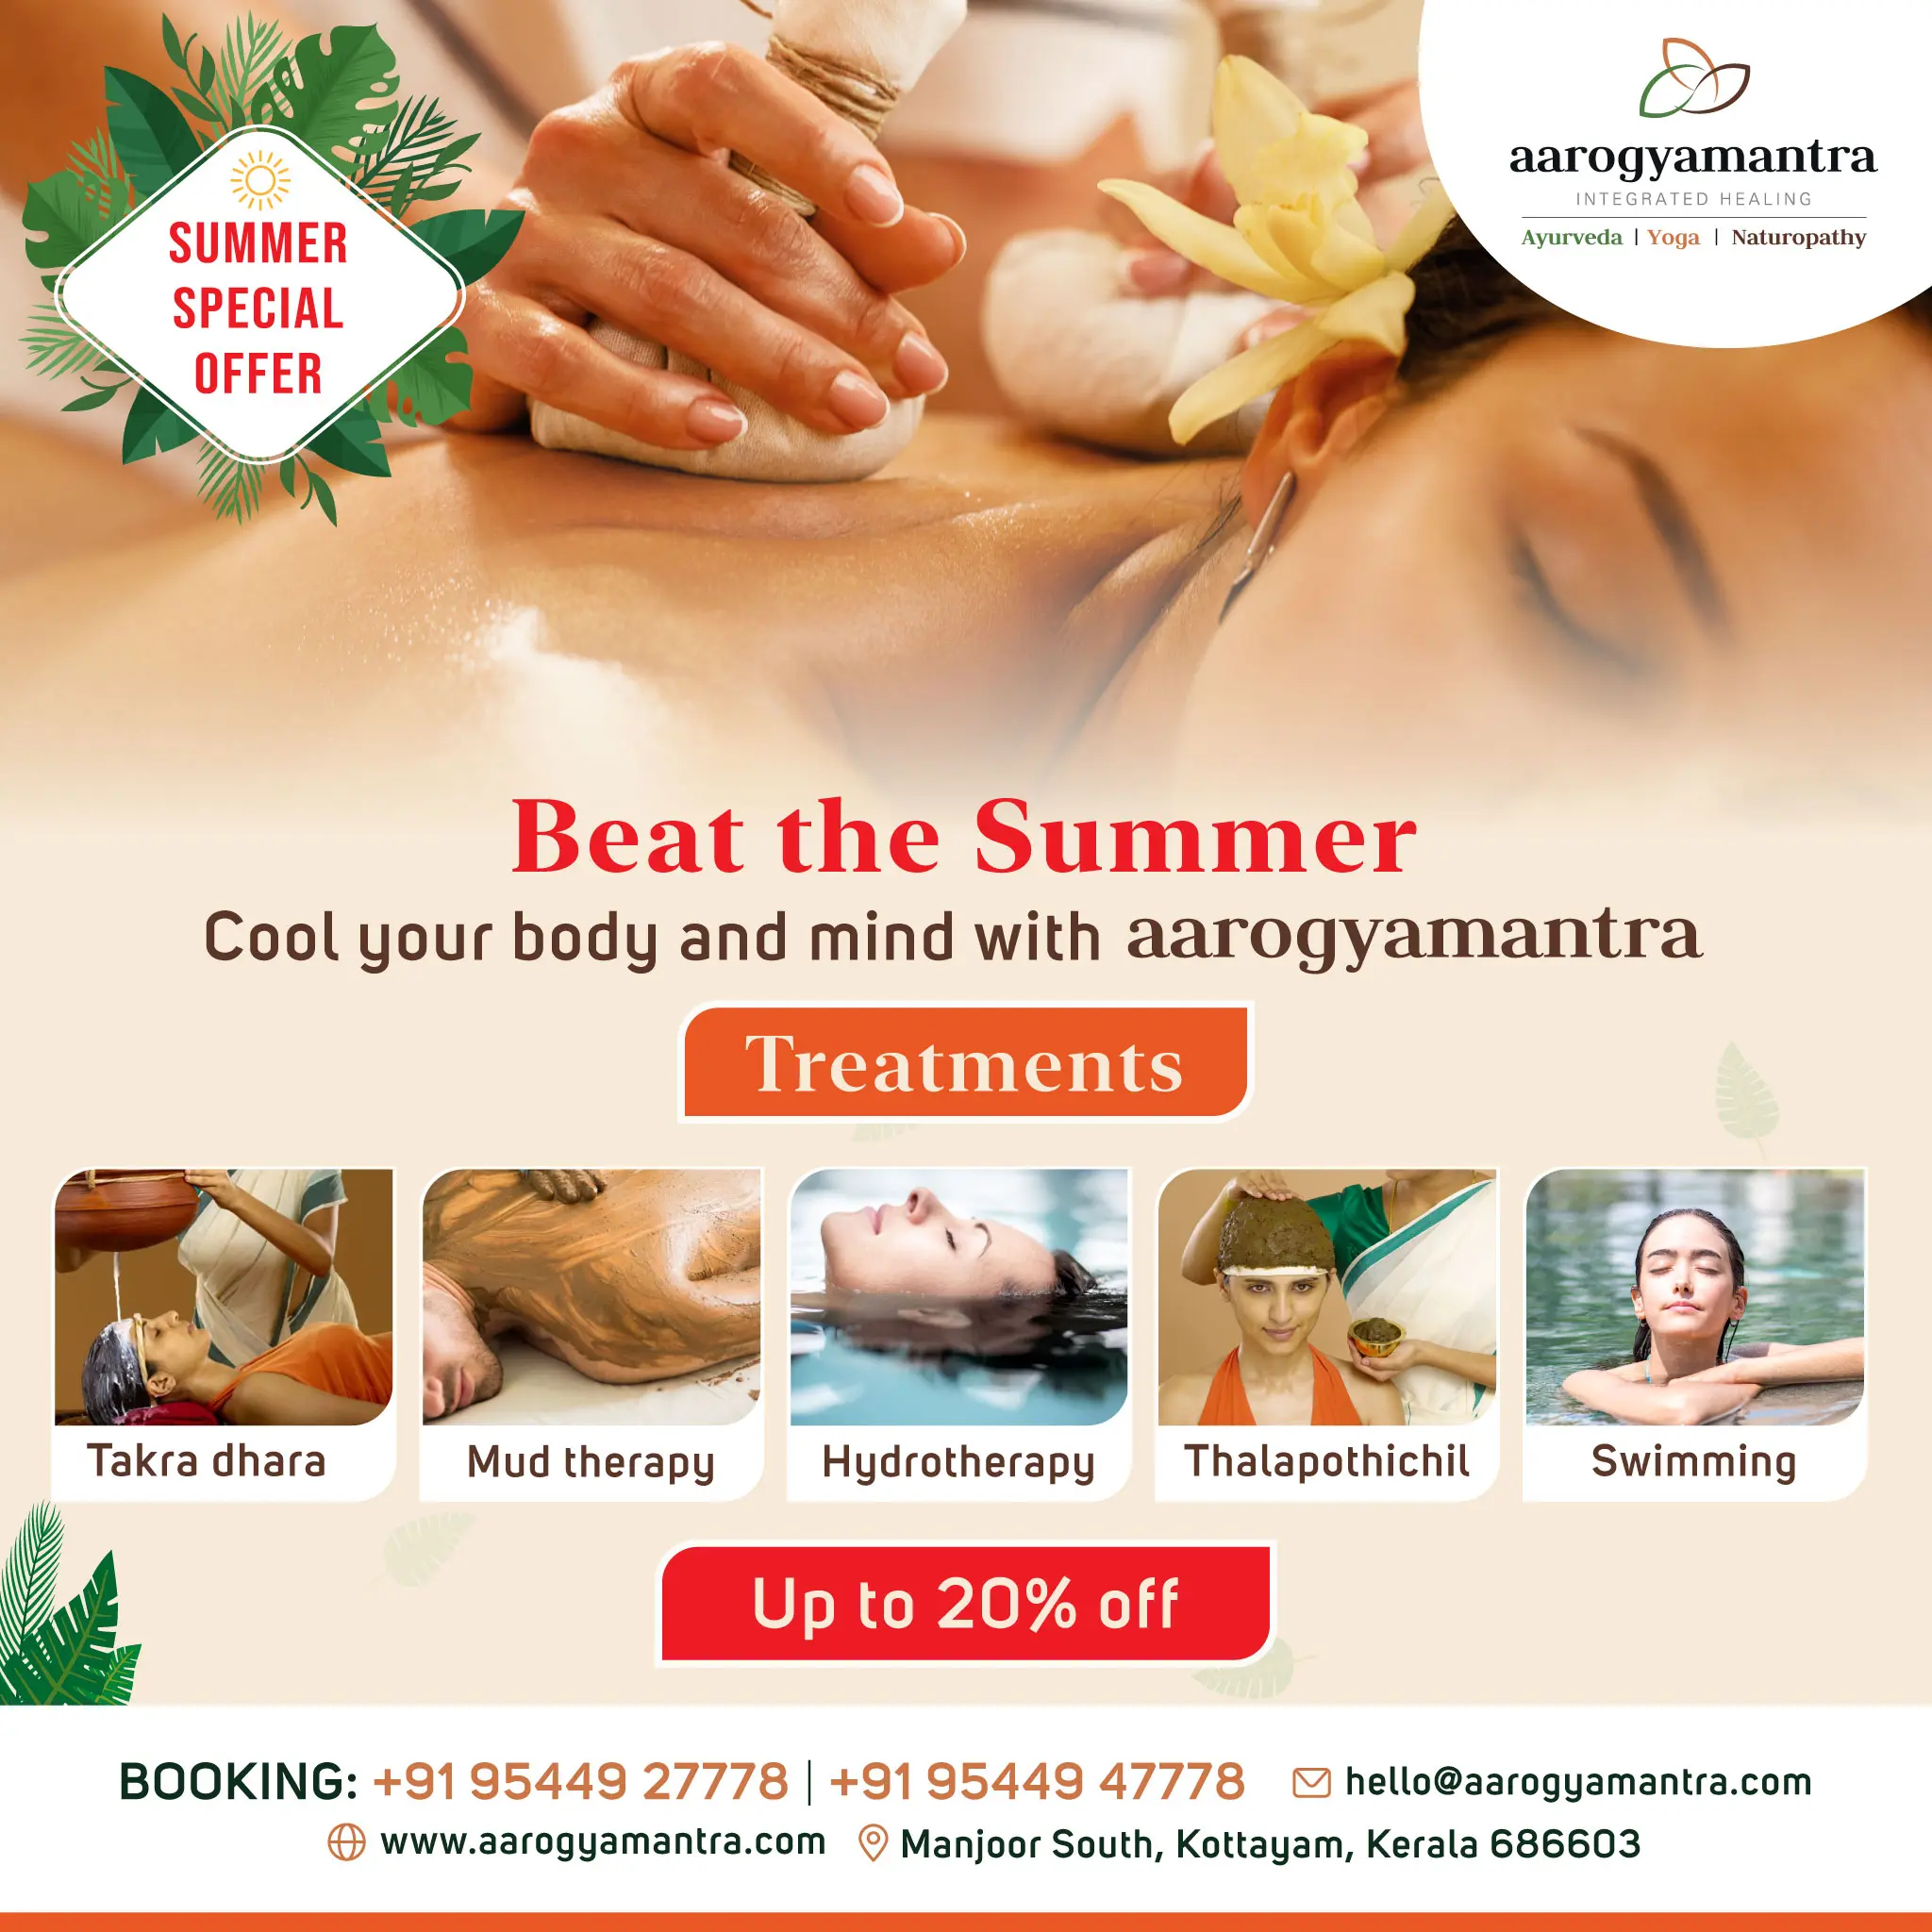 Beat the Heat with Aarogyamantra's Refreshing Treatments